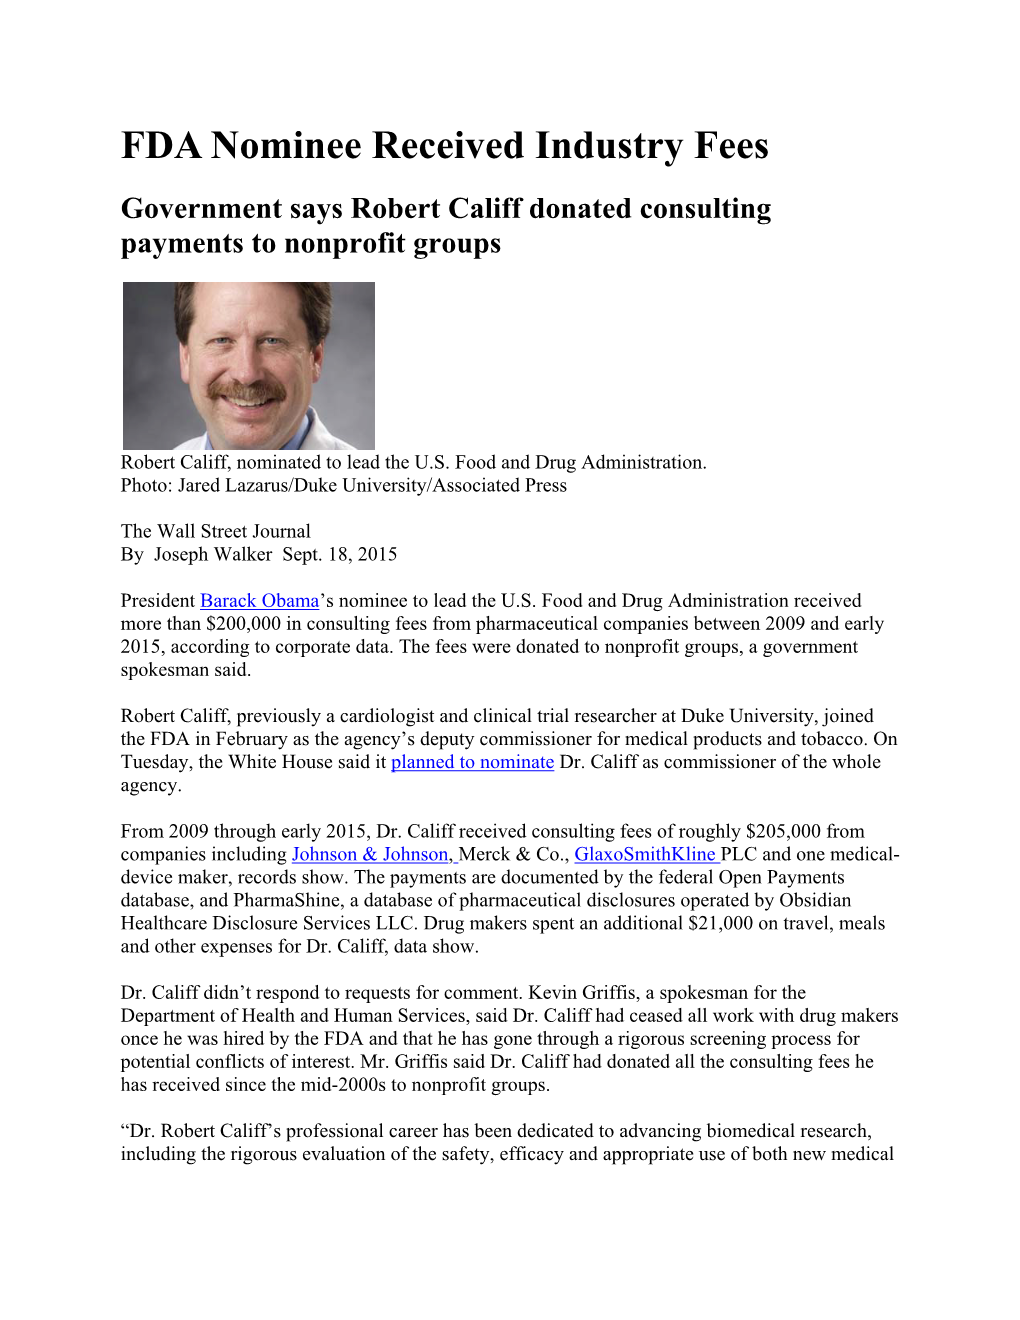 FDA Nominee Received Industry Fees Government Says Robert Califf Donated Consulting Payments to Nonprofit Groups